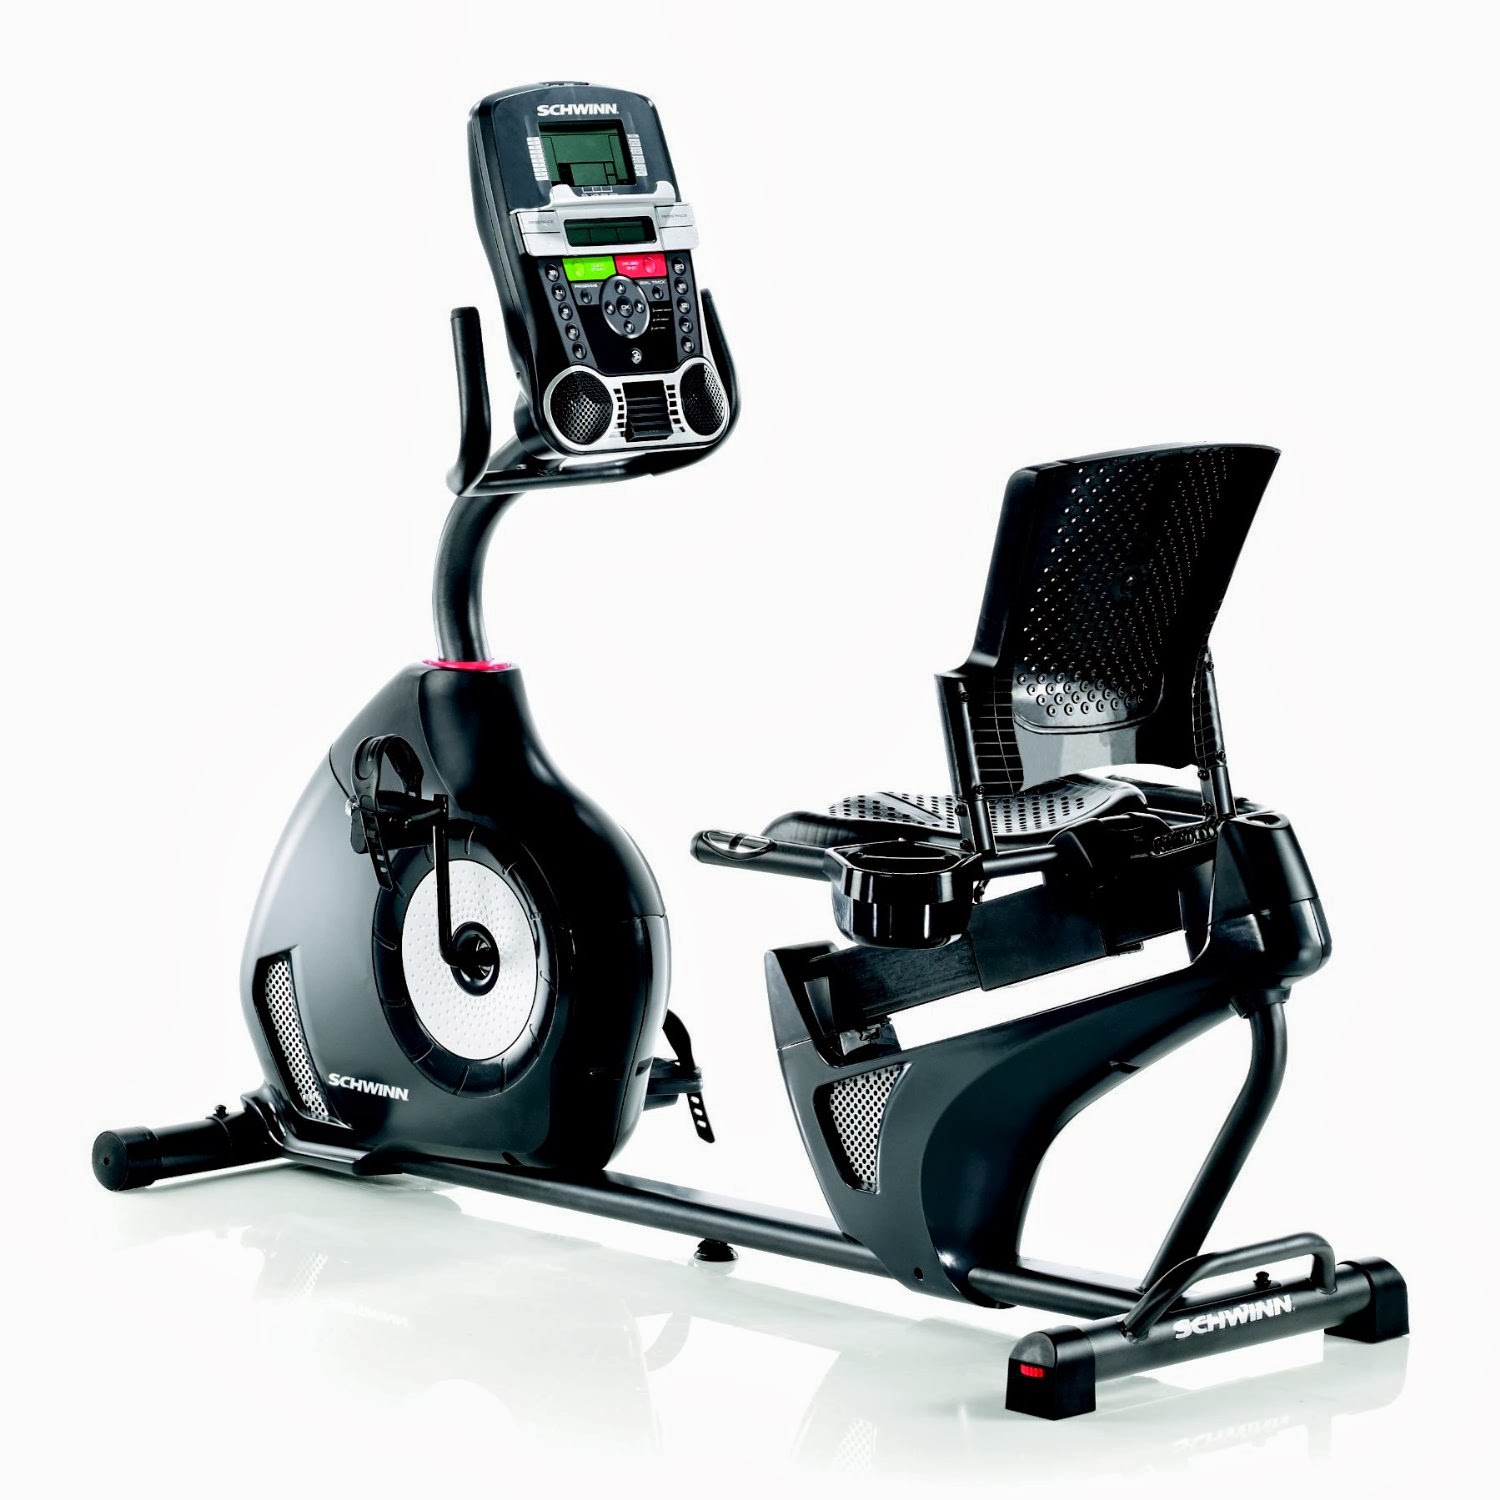 Recumbent exercise bikes reviews of features, comparisons, differences, prices